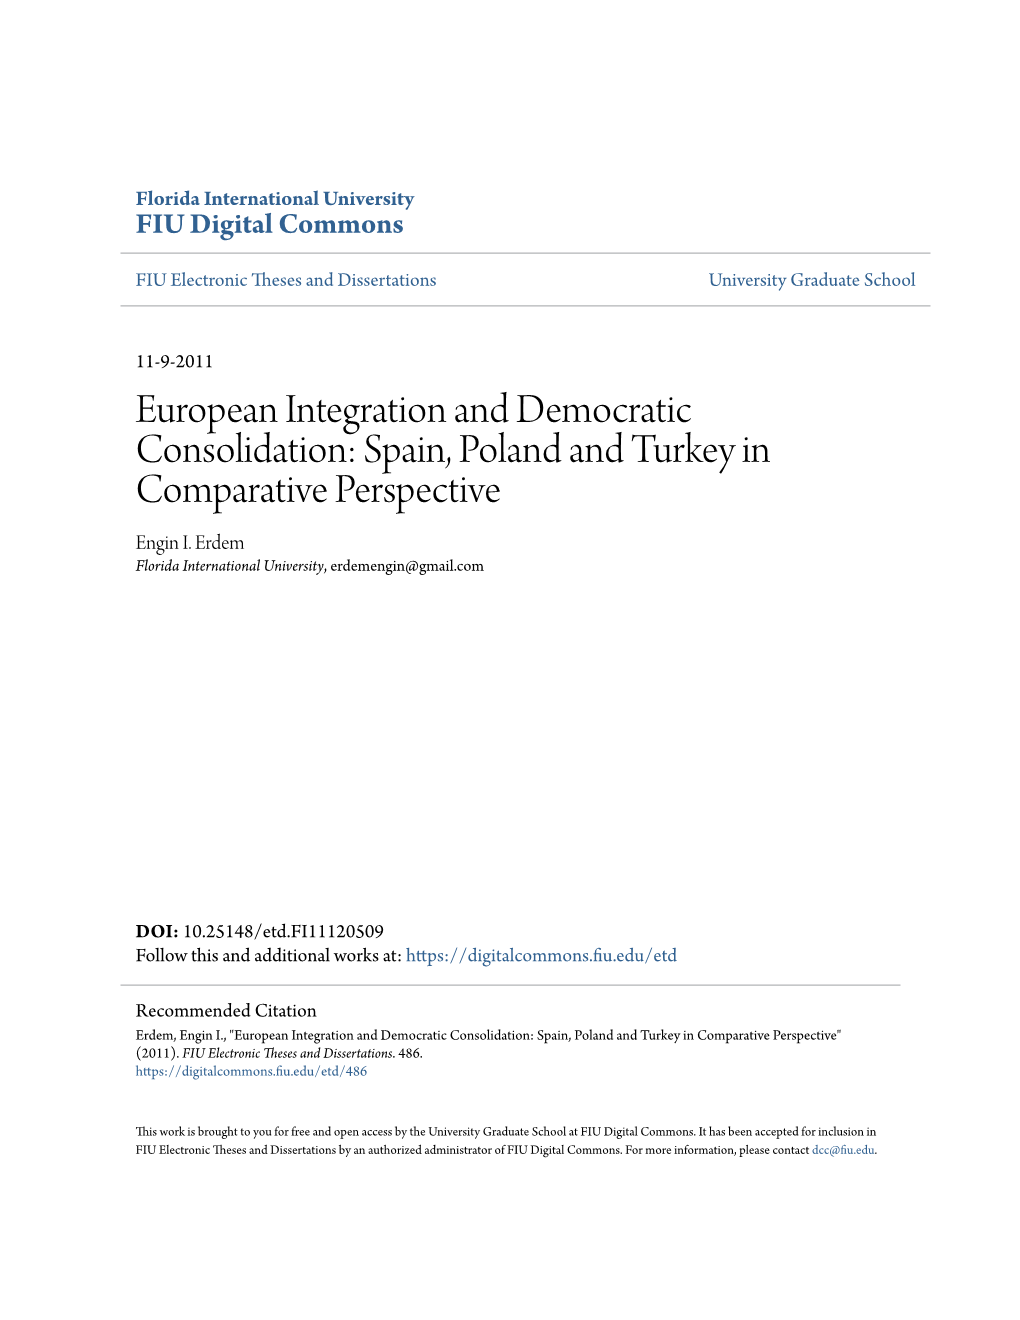 European Integration and Democratic Consolidation: Spain, Poland and Turkey in Comparative Perspective Engin I